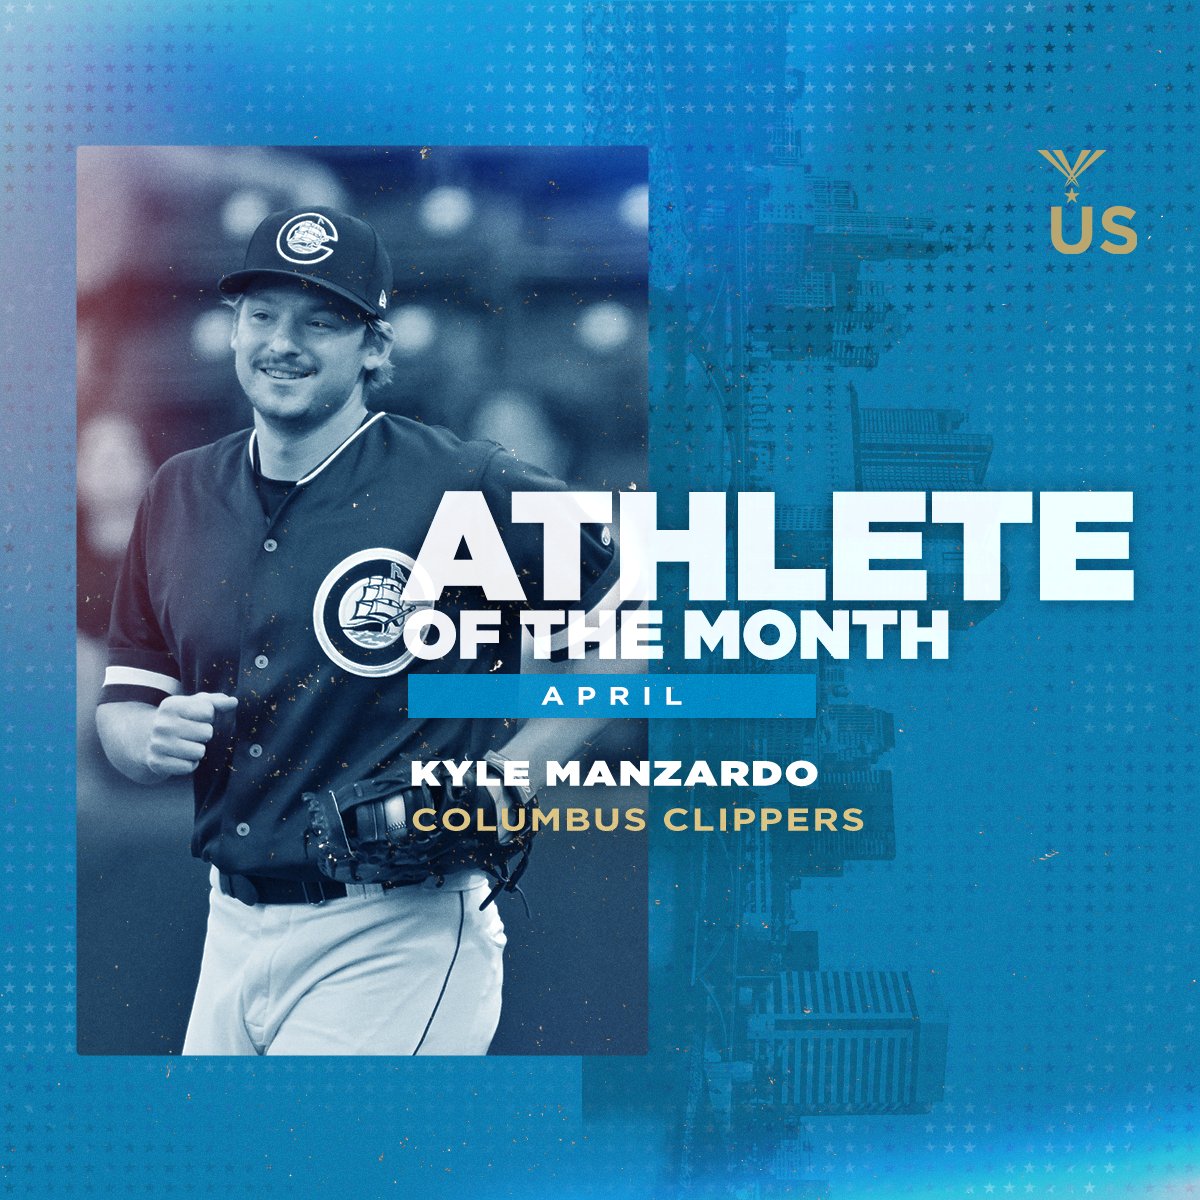 Kyle Manzardo is getting it done at the plate! The @CLBClippers first baseman had 7 homers and 18 RBIs for a .318 batting average and .636 slugging percentage in April ⚾️